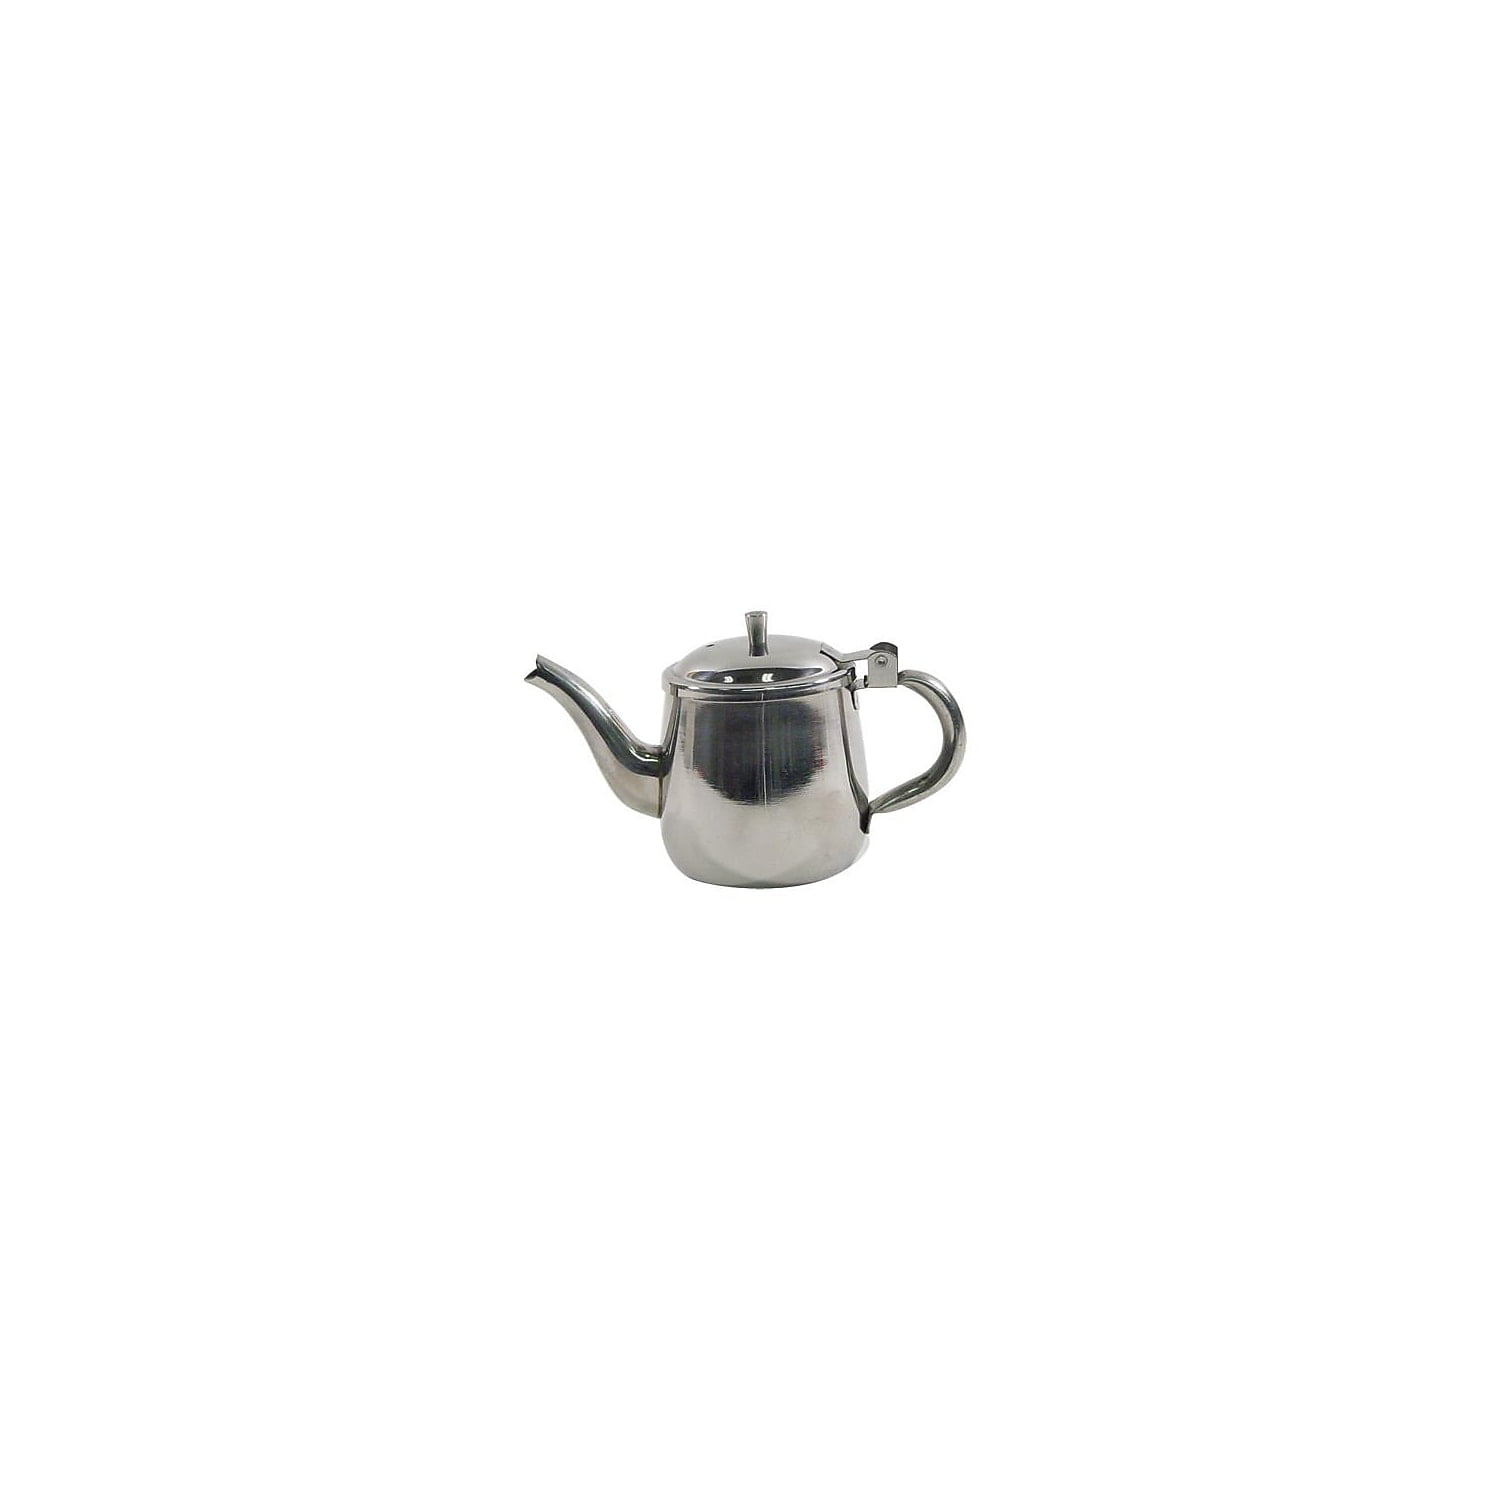 Everyday Large Aluminium Easy Grip Handle Teapot Home Office Catering Pot 